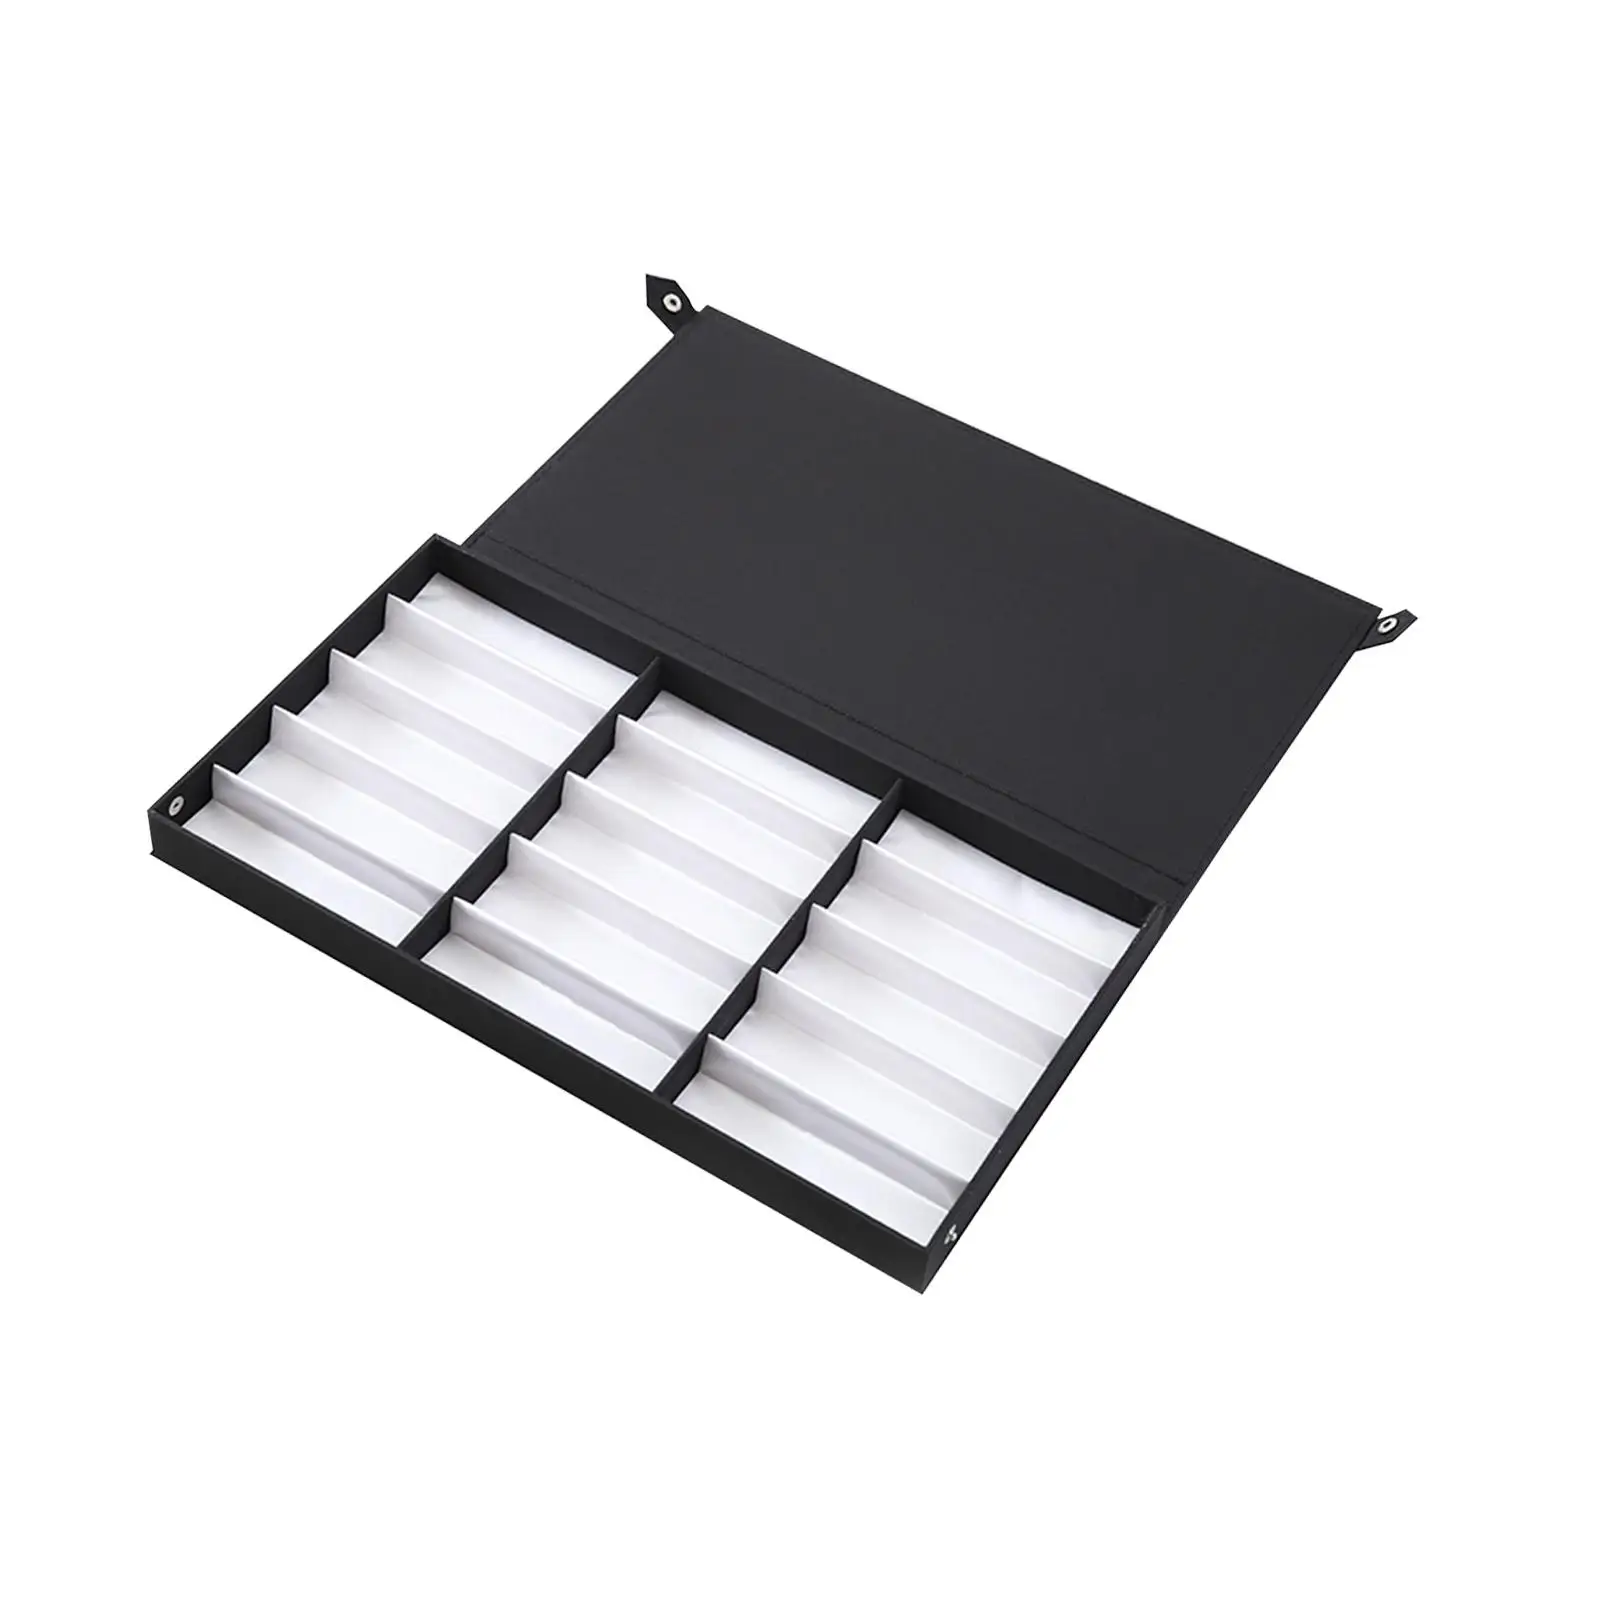 Glasses Display Box Glasses Showcase Glasses Storage Case Sunglasses Display Stand 15 Grids for Travel Table Drawer Home Closet